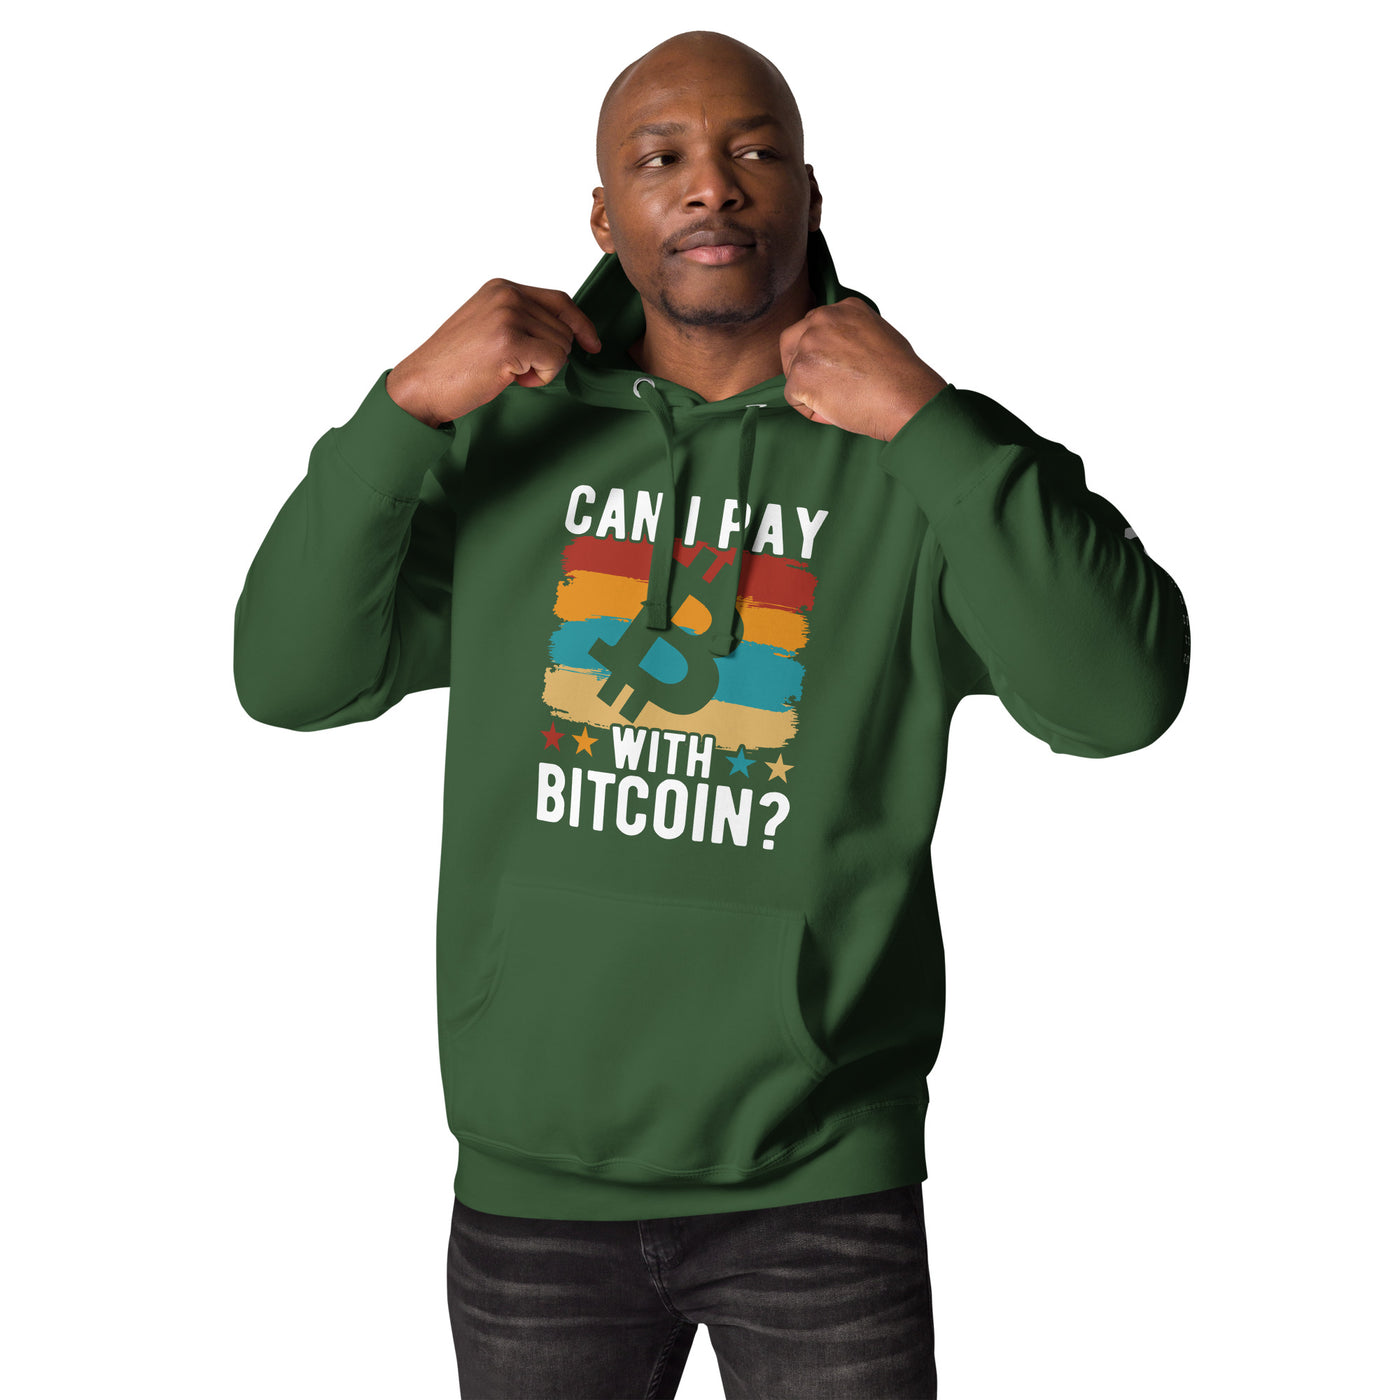 Can I pay with Bitcoin - Unisex Hoodie